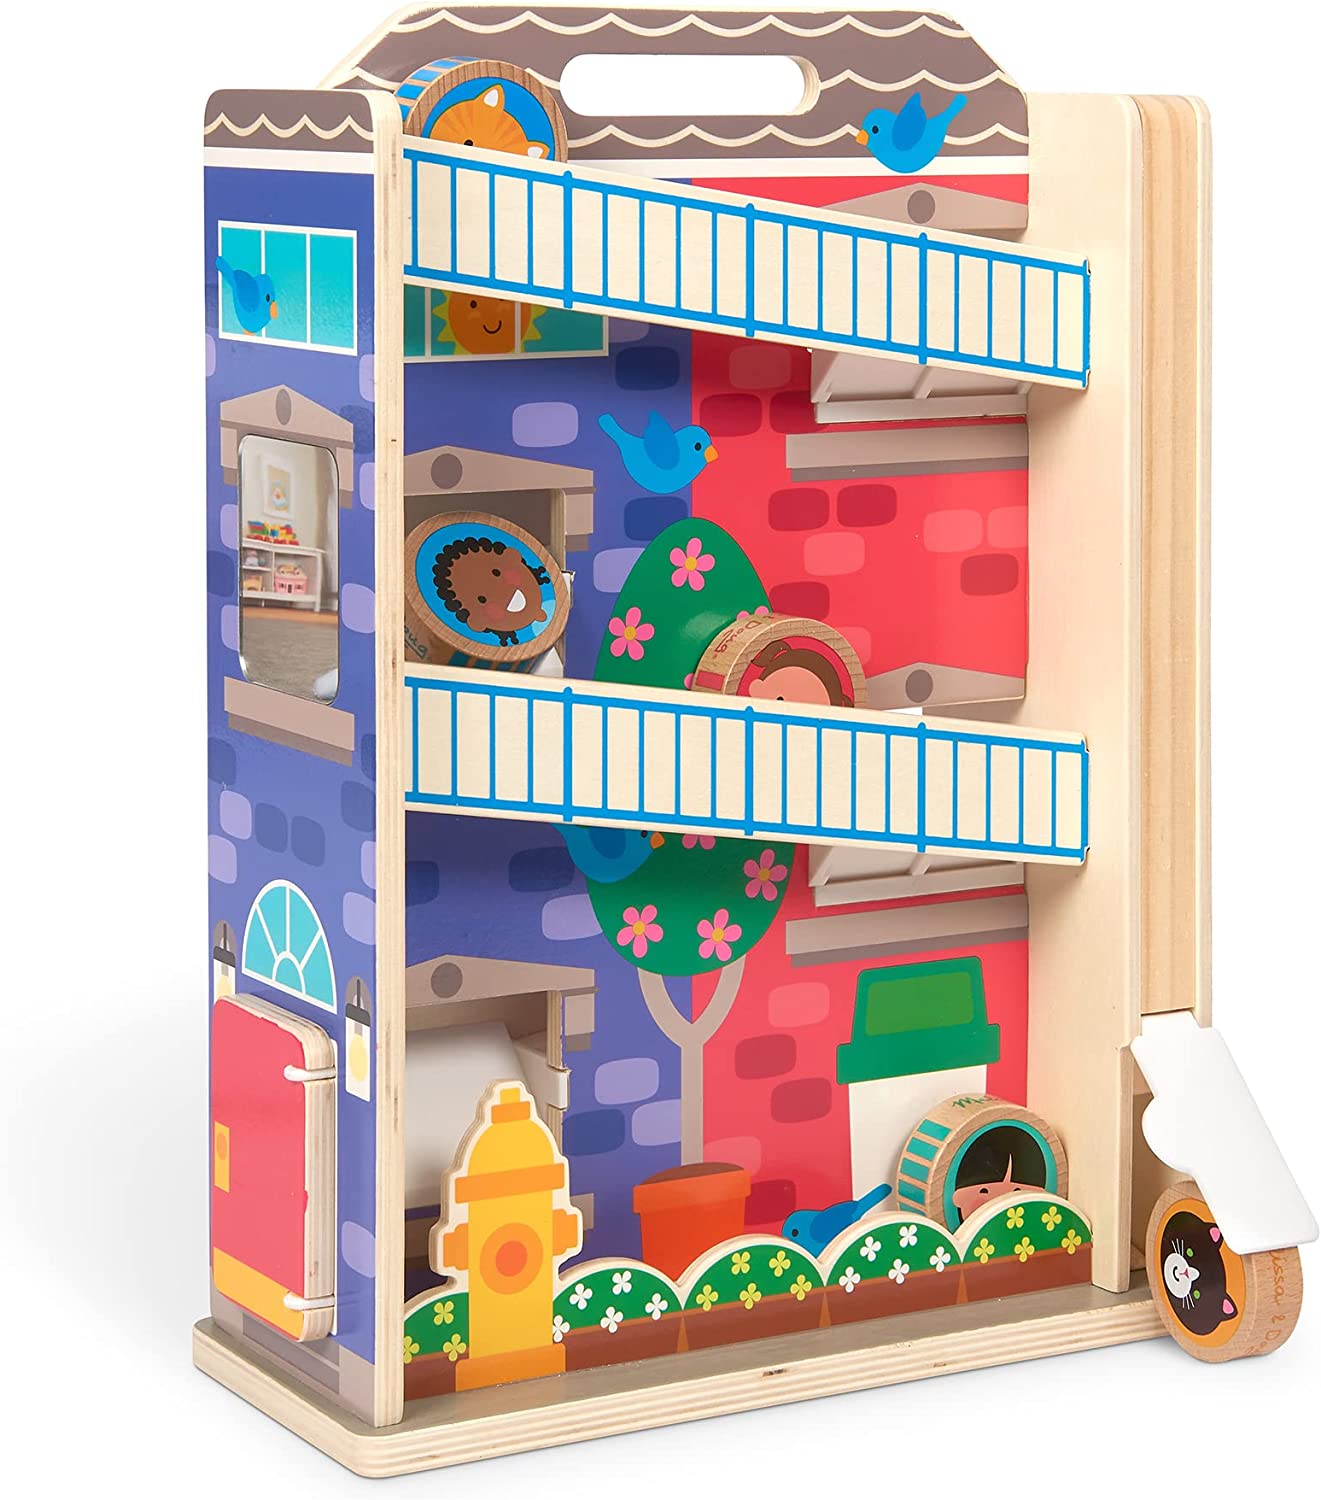 Melissa & DougGO Tots Wooden toy with Collectible CharactersToy: Wooden Town House TumbleEarthlets